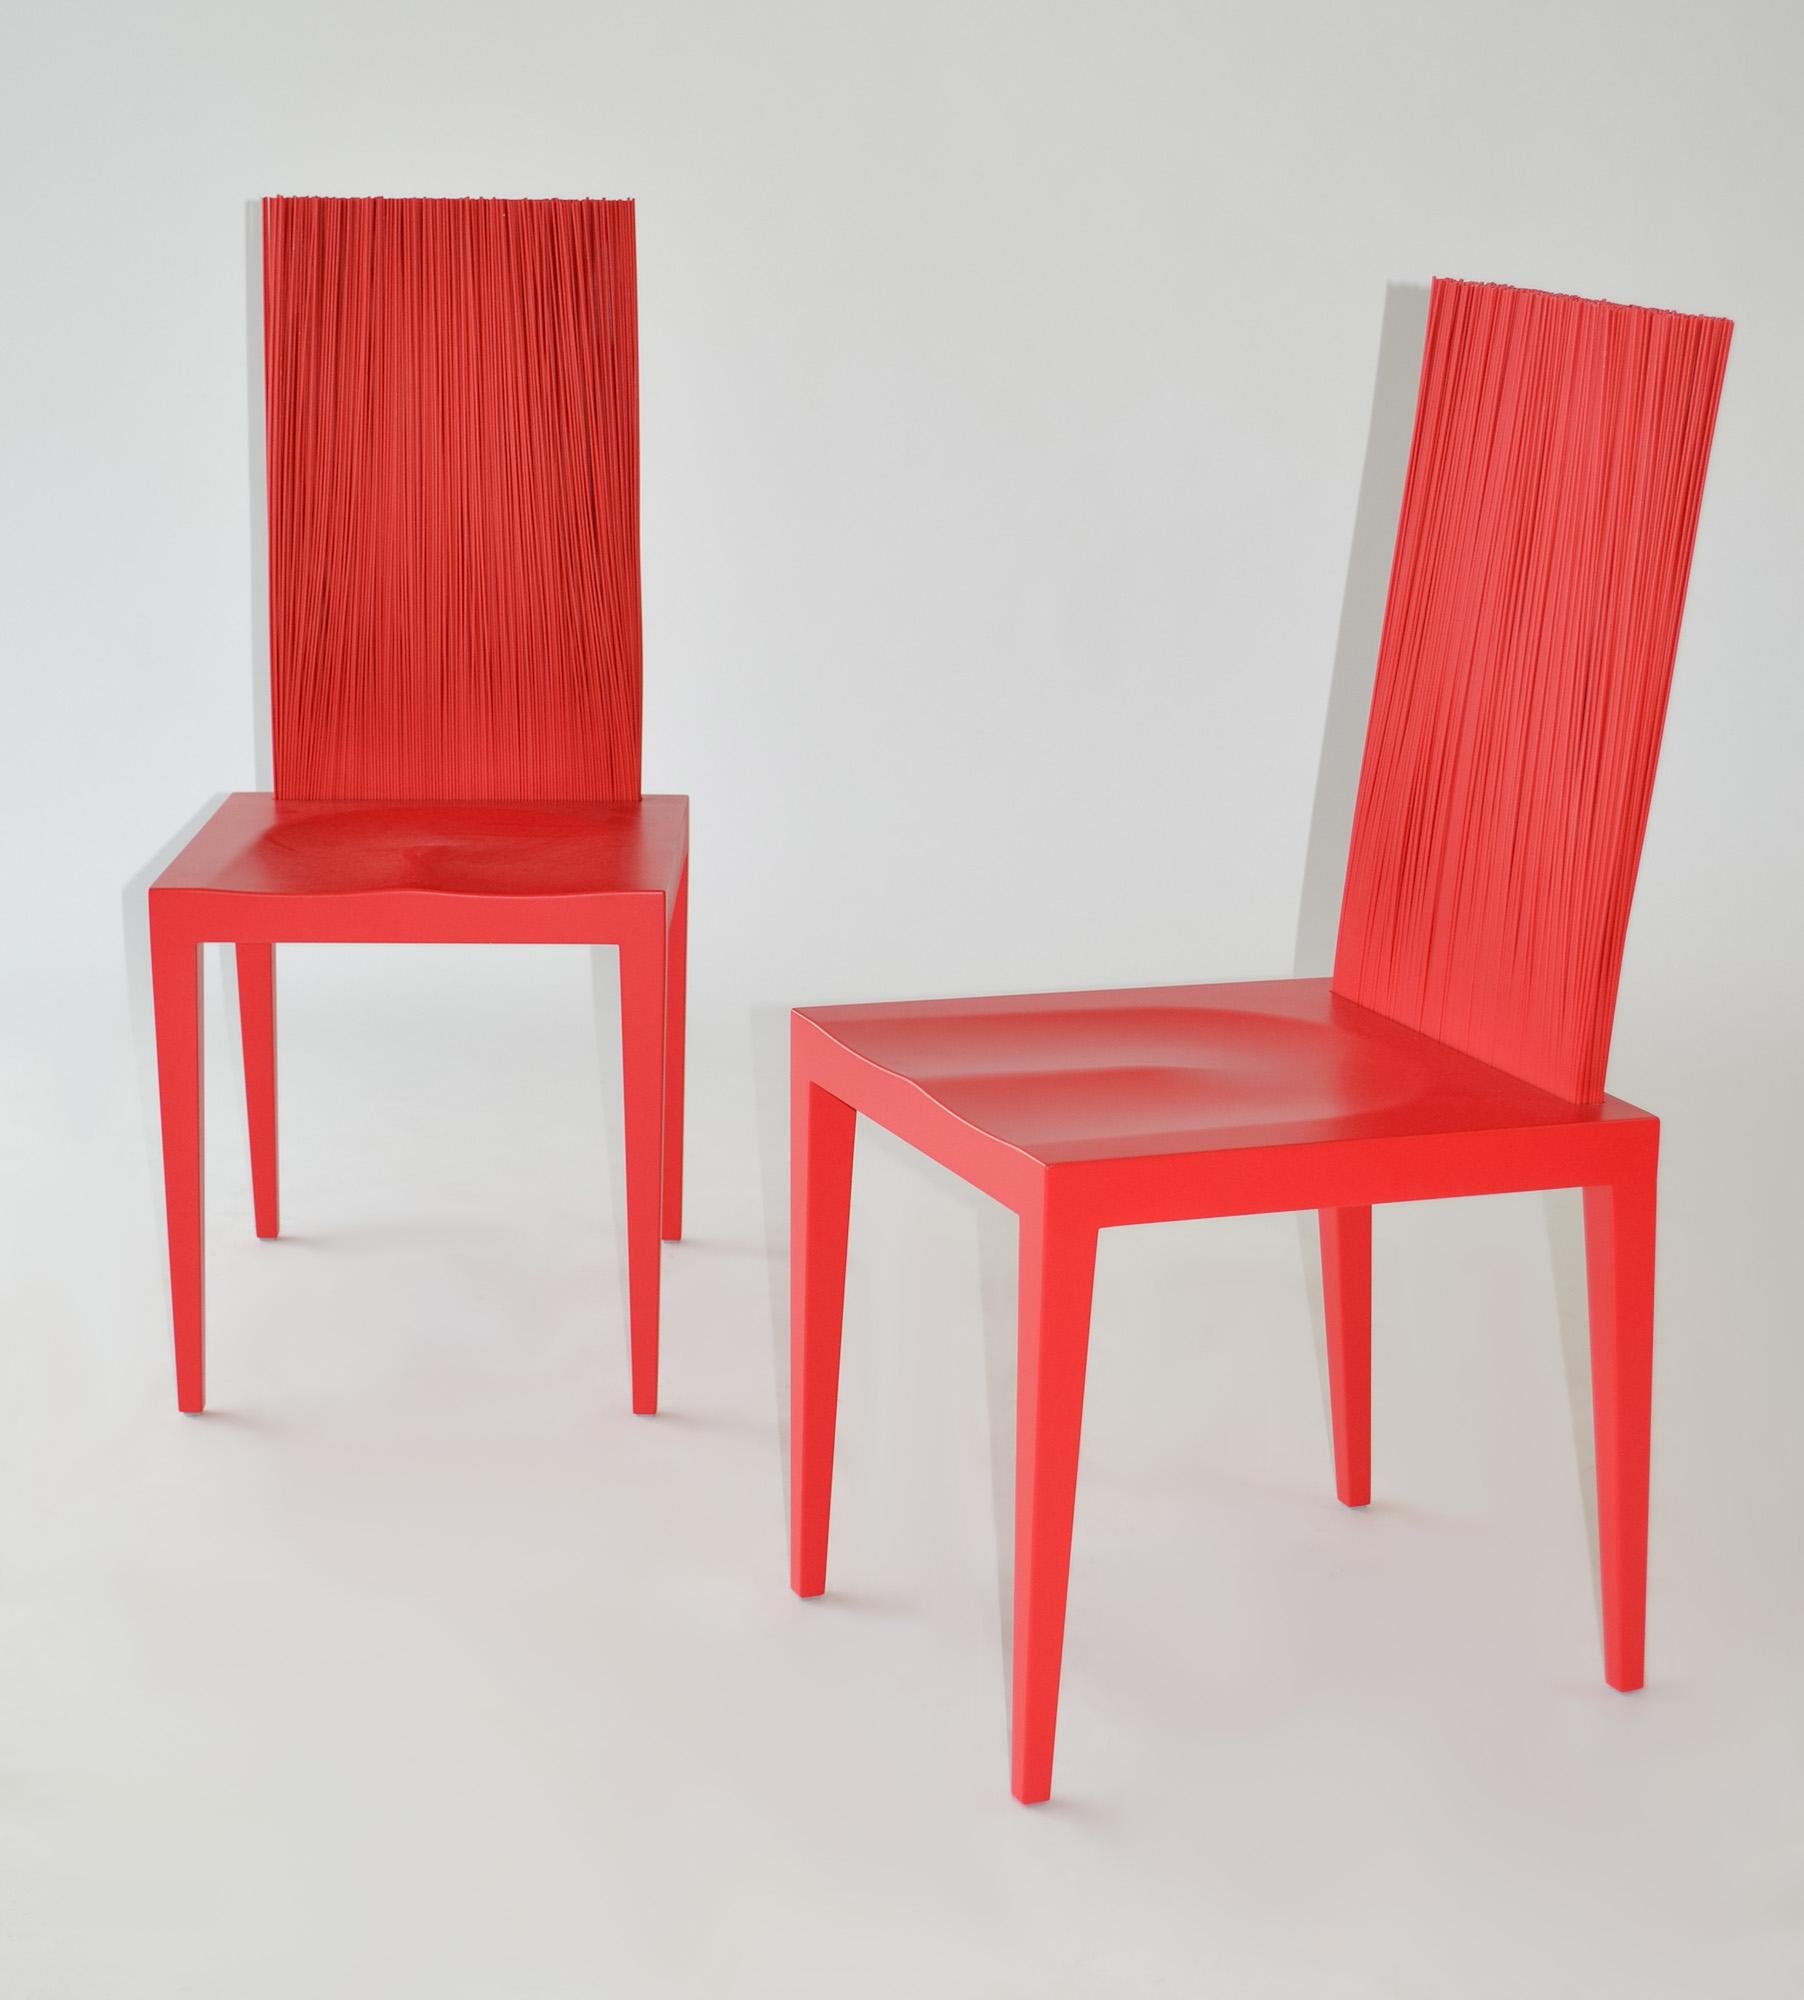  Pair of Chairs by the Campana Brothers for Edra, 'Jenette' 
Pair of Red Jenette chairs by Fernando and Humberto Campana for Edra, Italy, 21st century.

Metal structure dipped and cast in rigid polyurethane, coated with red opaque polyurethane